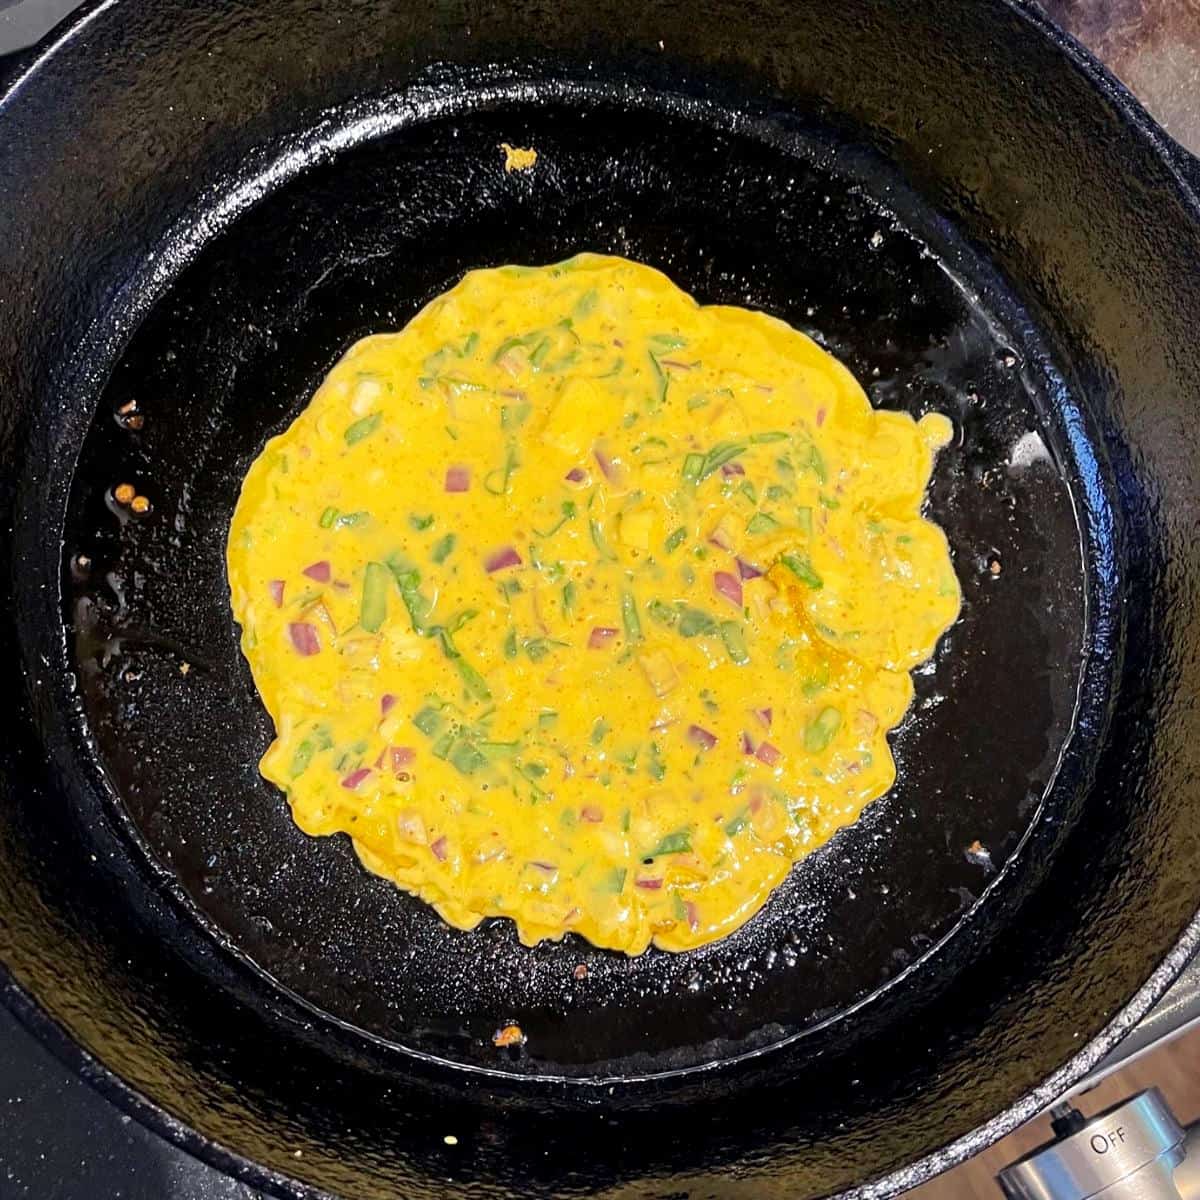 Besan chilla cooking on cast iron skillet.